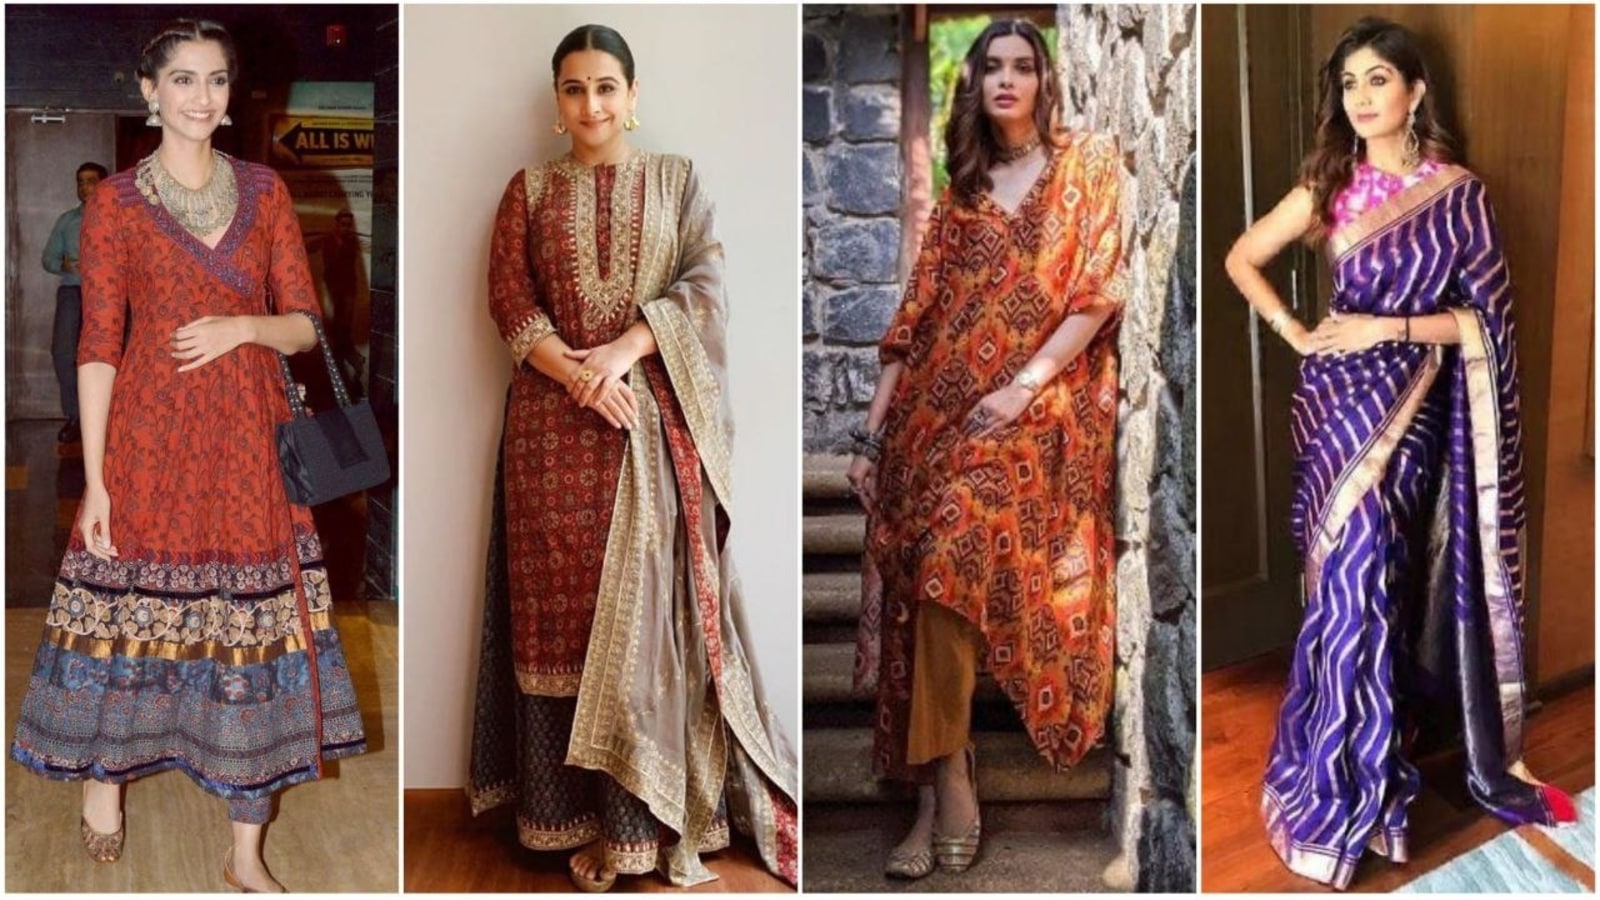 From Batik to Ajrak: 8 beautiful traditional Indian prints you must have in your wardrobe